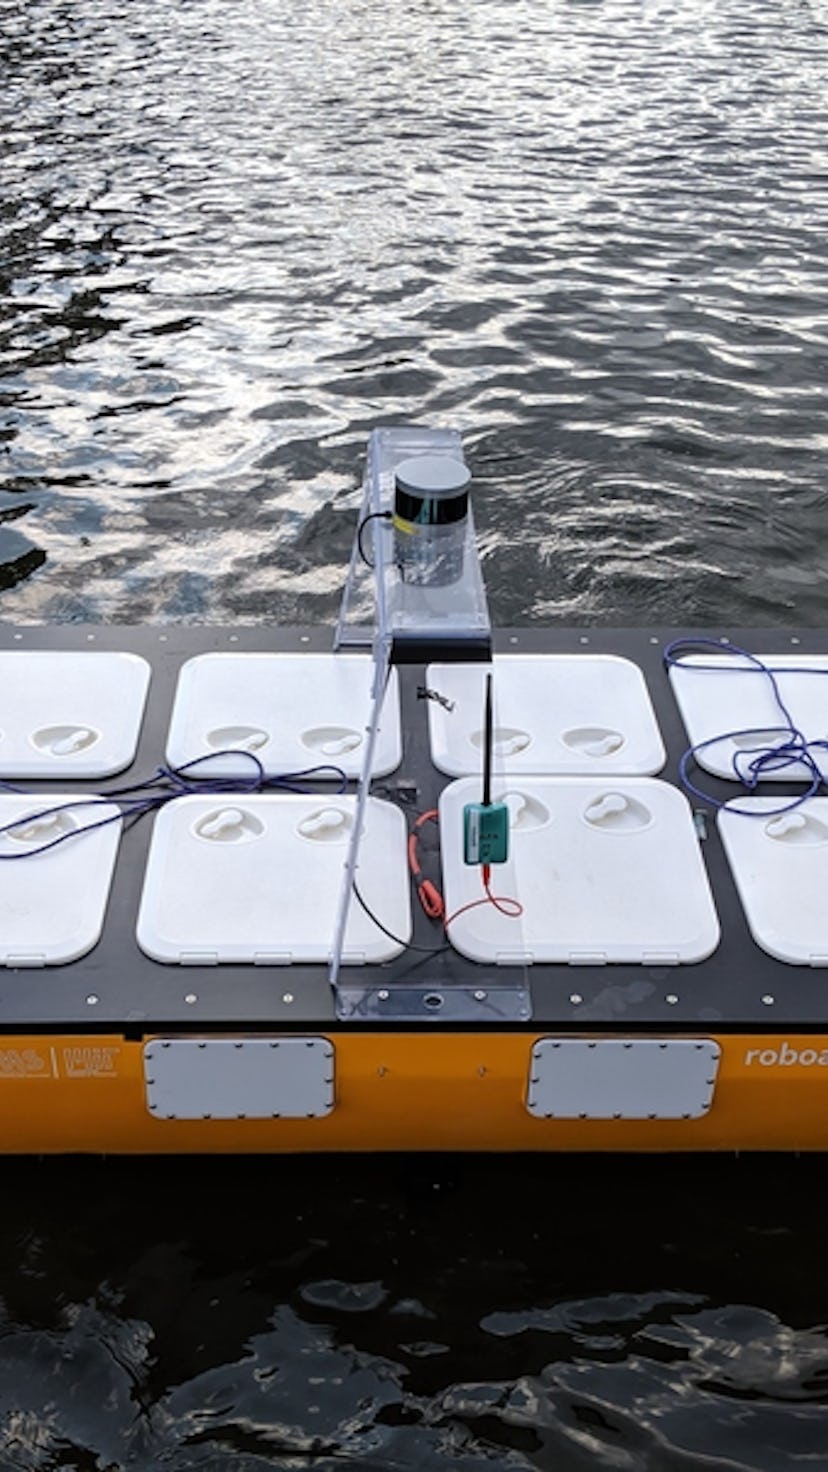 The autonomous Roboat II made by MIT CSAIL and researchers in Amsterdam